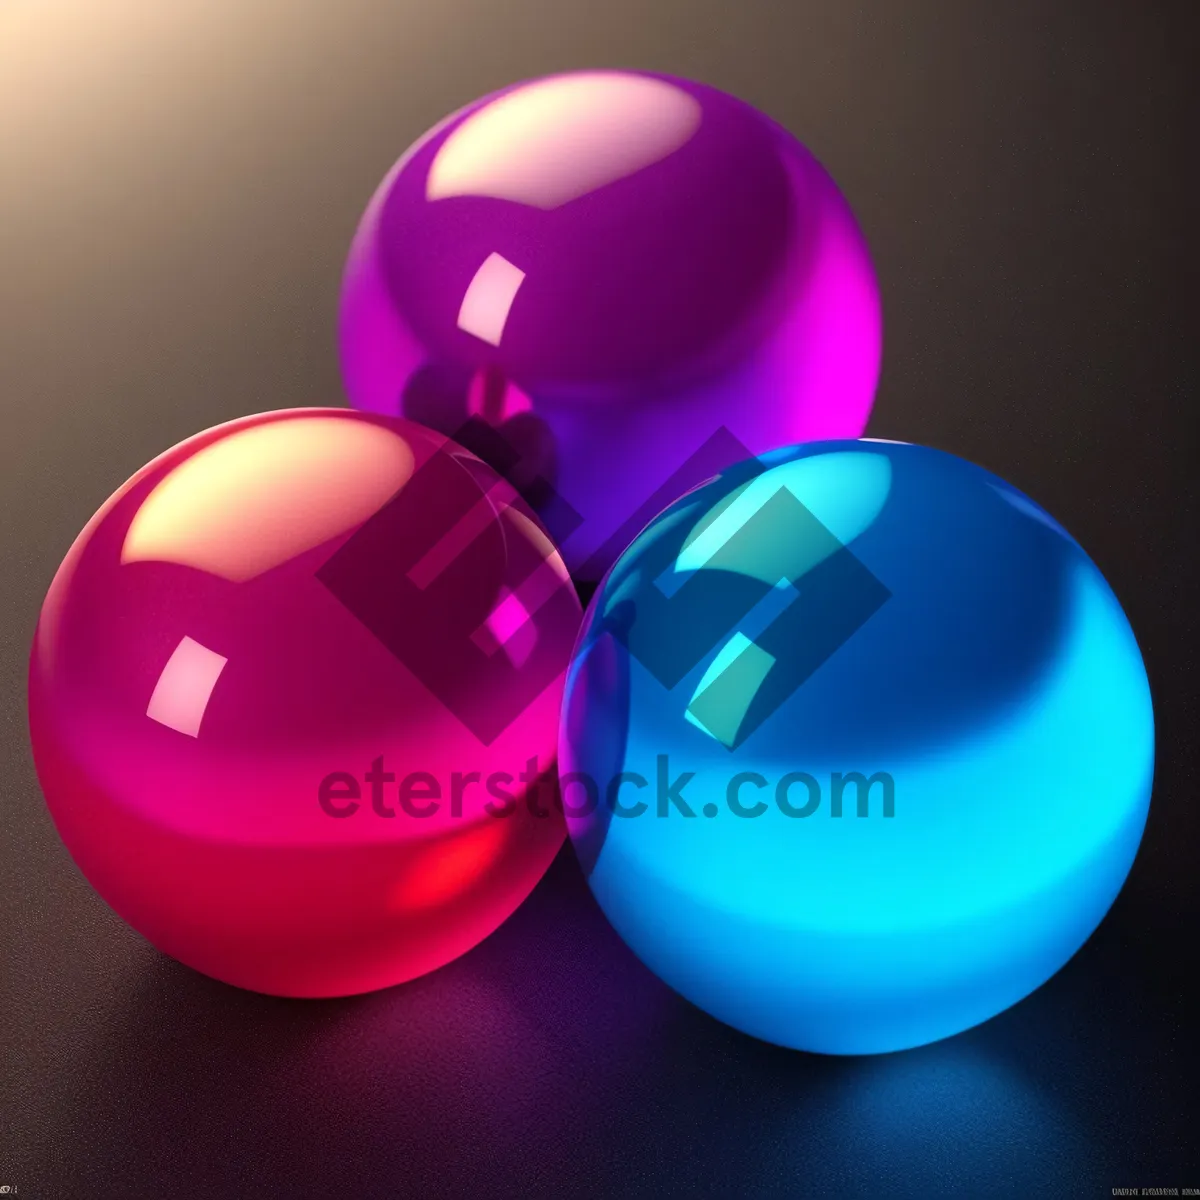 Picture of Colorful Glass Button Set with Shiny Reflections